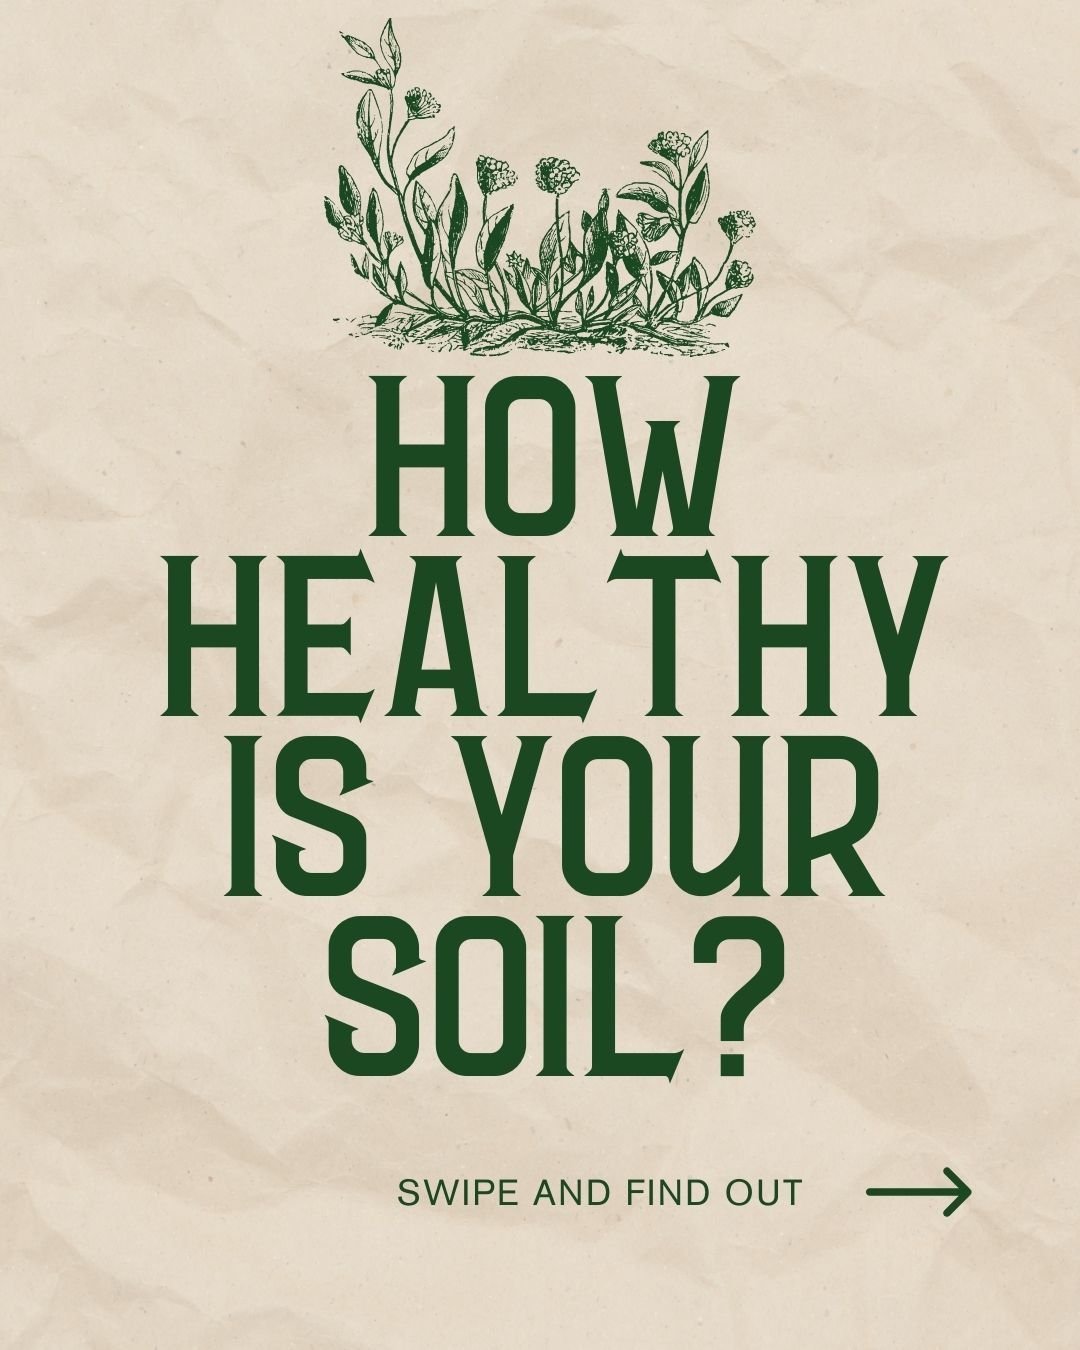 Curious about the secret to a lush garden? 

Start with the soil! Learn the simple steps to assess your soil's health and ensure your plants get the perfect foundation. Our expert tips make it easy!

#SoilTesting #GardeningSuccess #SustainableGardeni